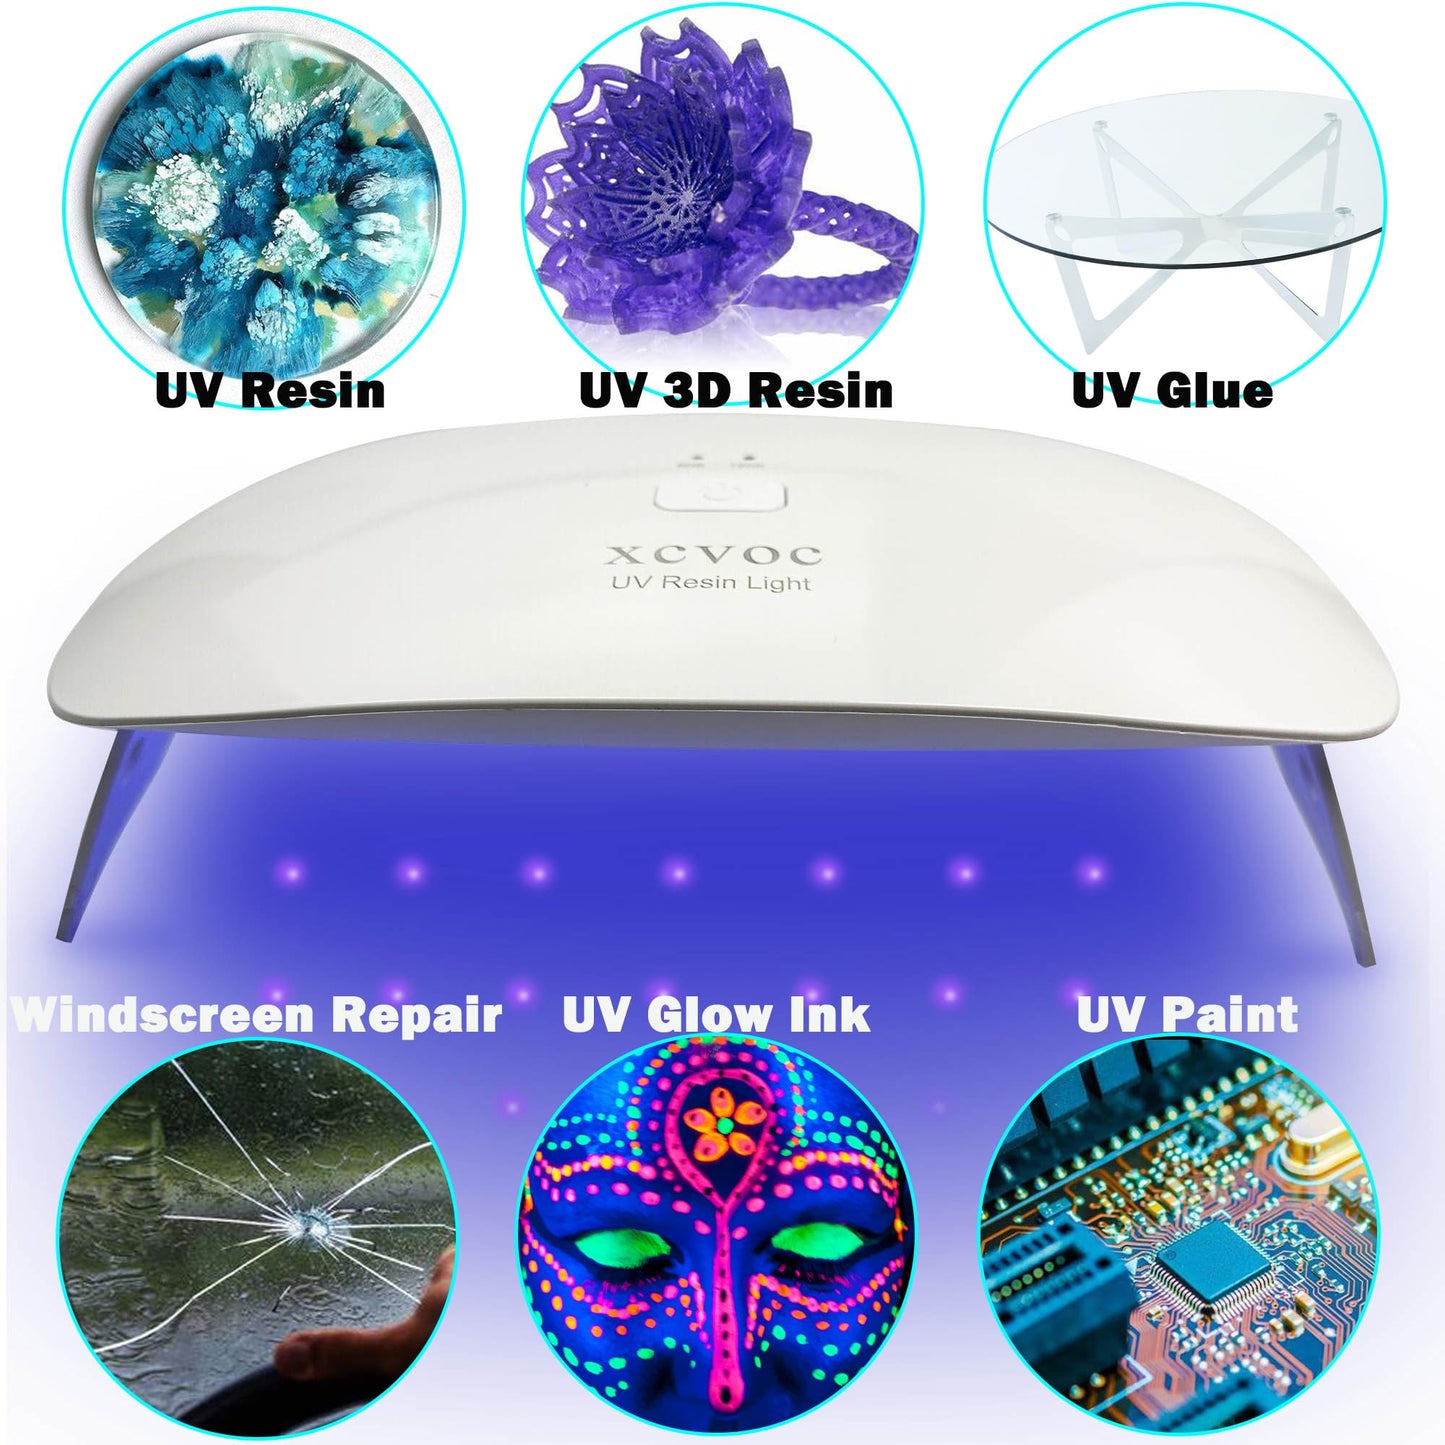 UV Resin Light Lamp Curing for Crafts Epoxy,3D Printer UV Resin Curing Light for SLA/DLP/LCD 3D Printing Resin Curing Station/Machine/Lamp/Box